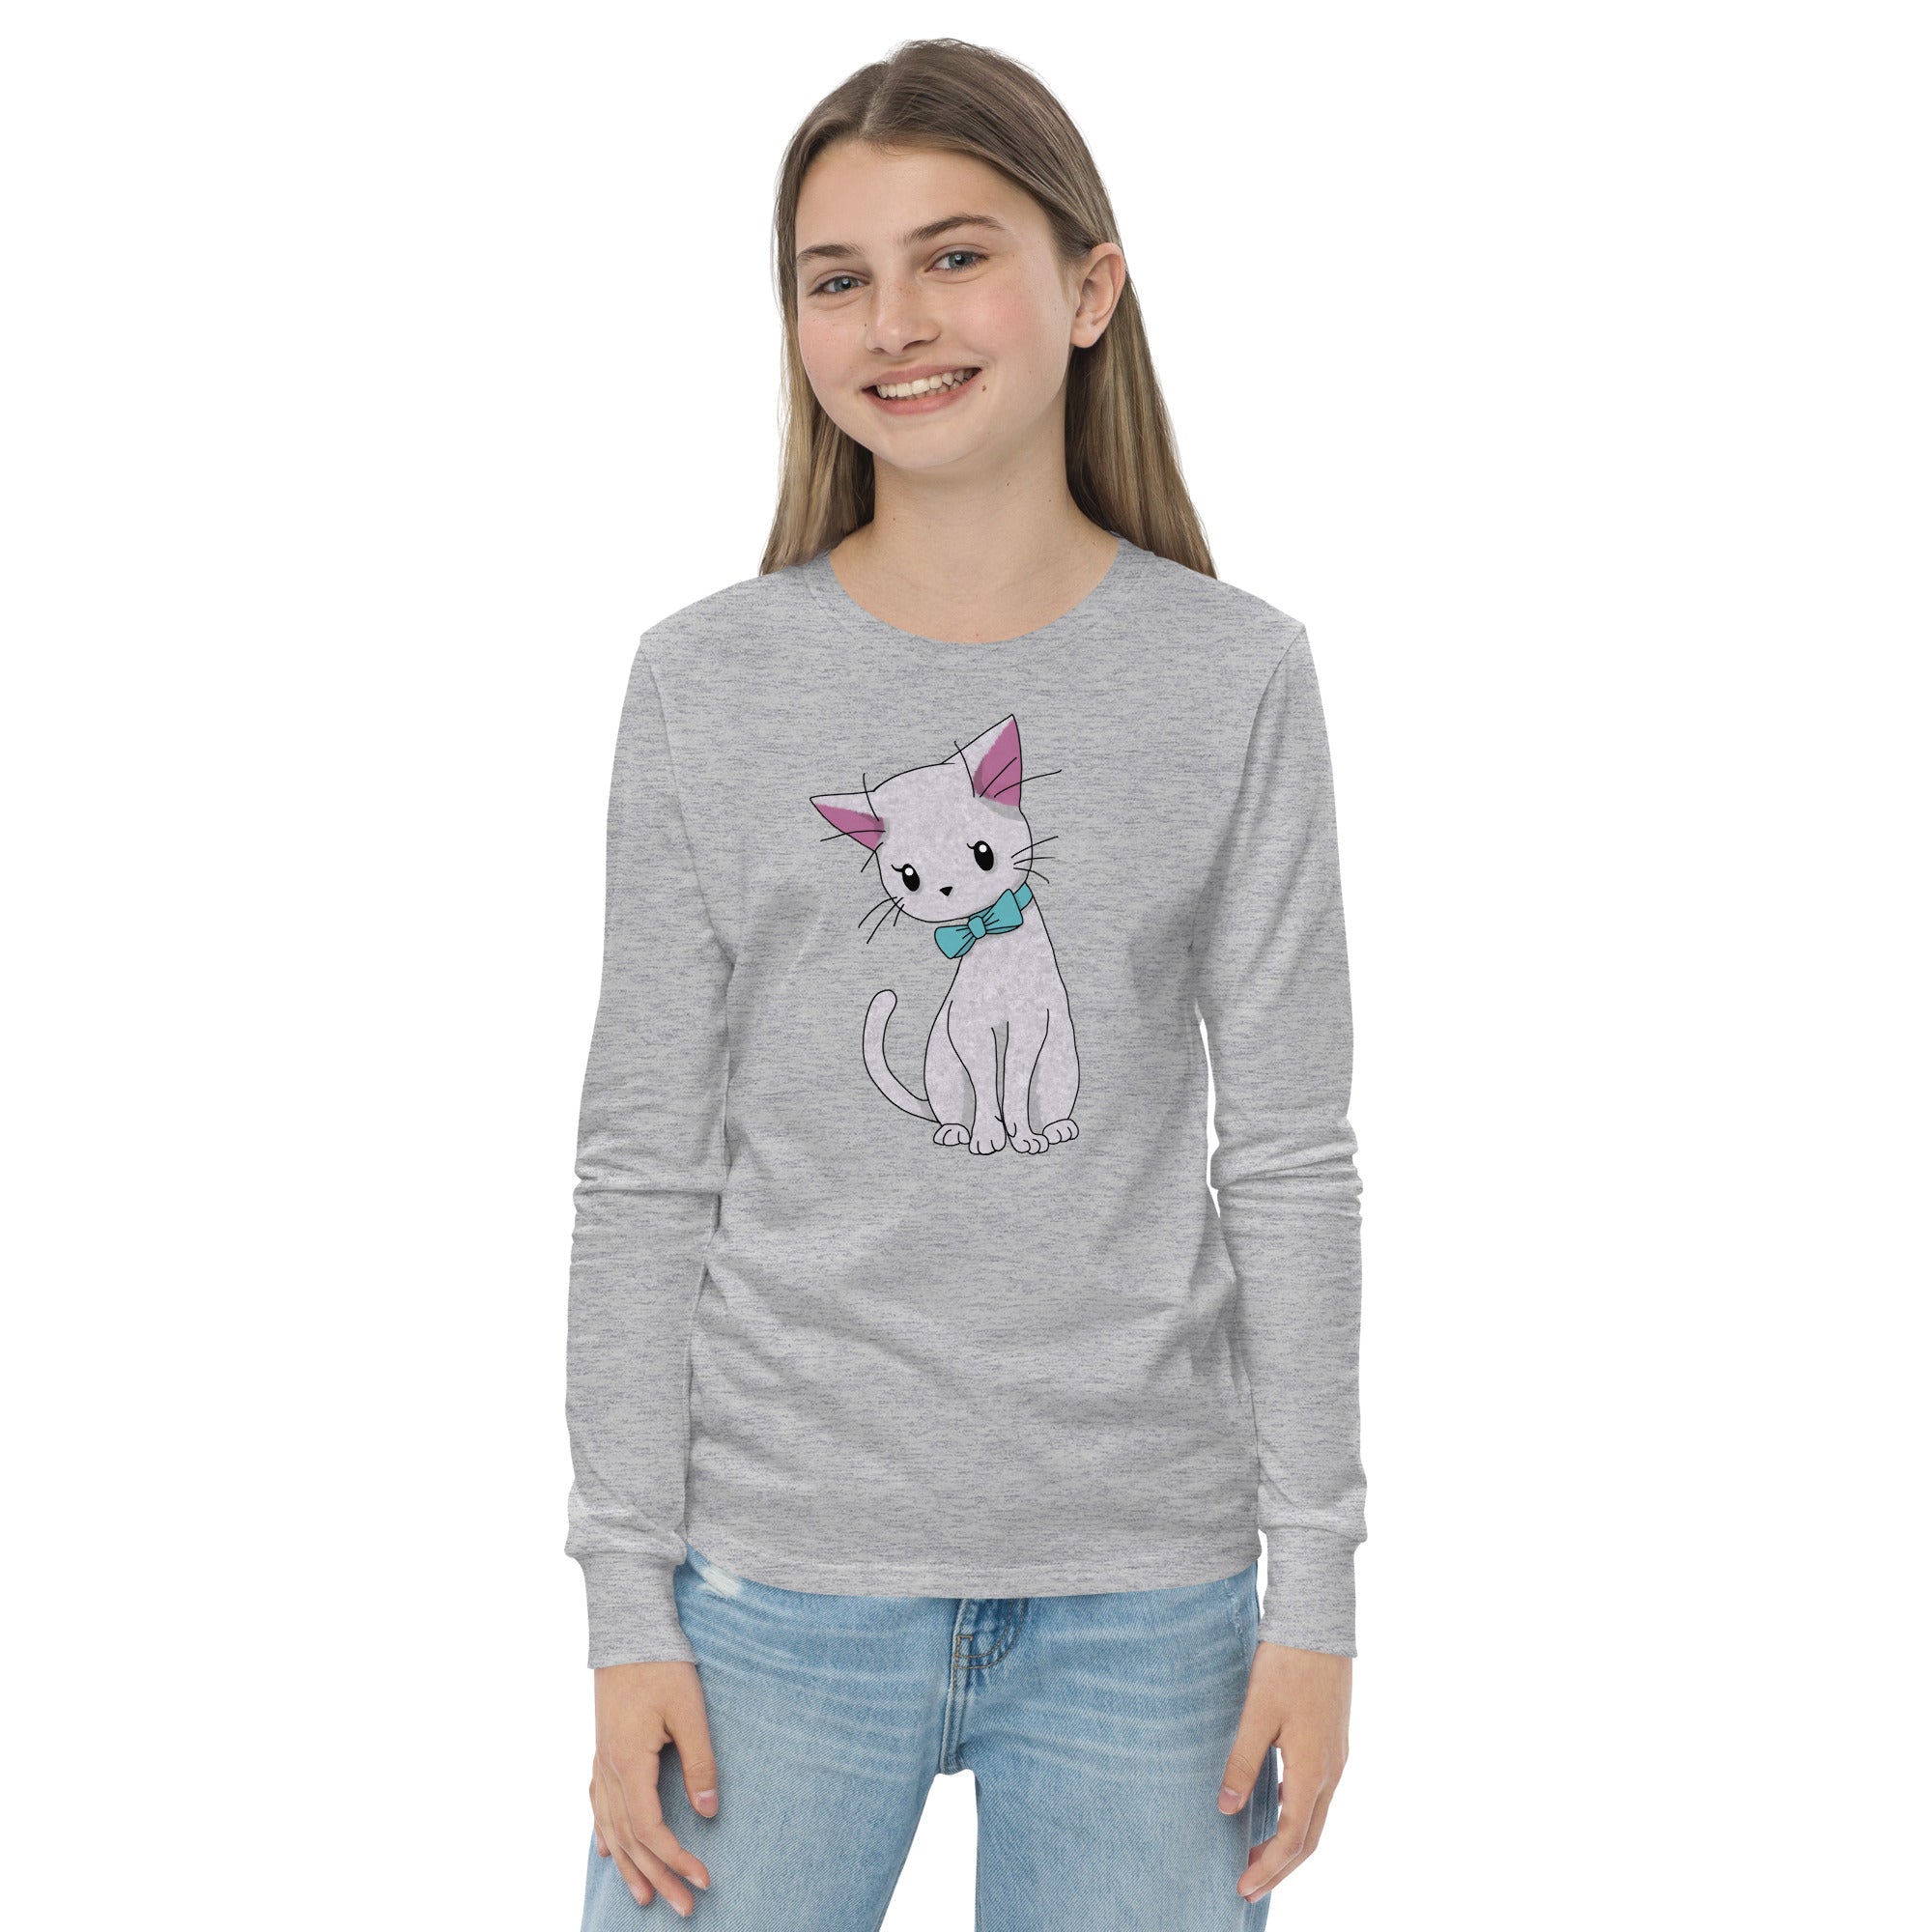 Cat with Bow Tie Youth Long Sleeve Tee